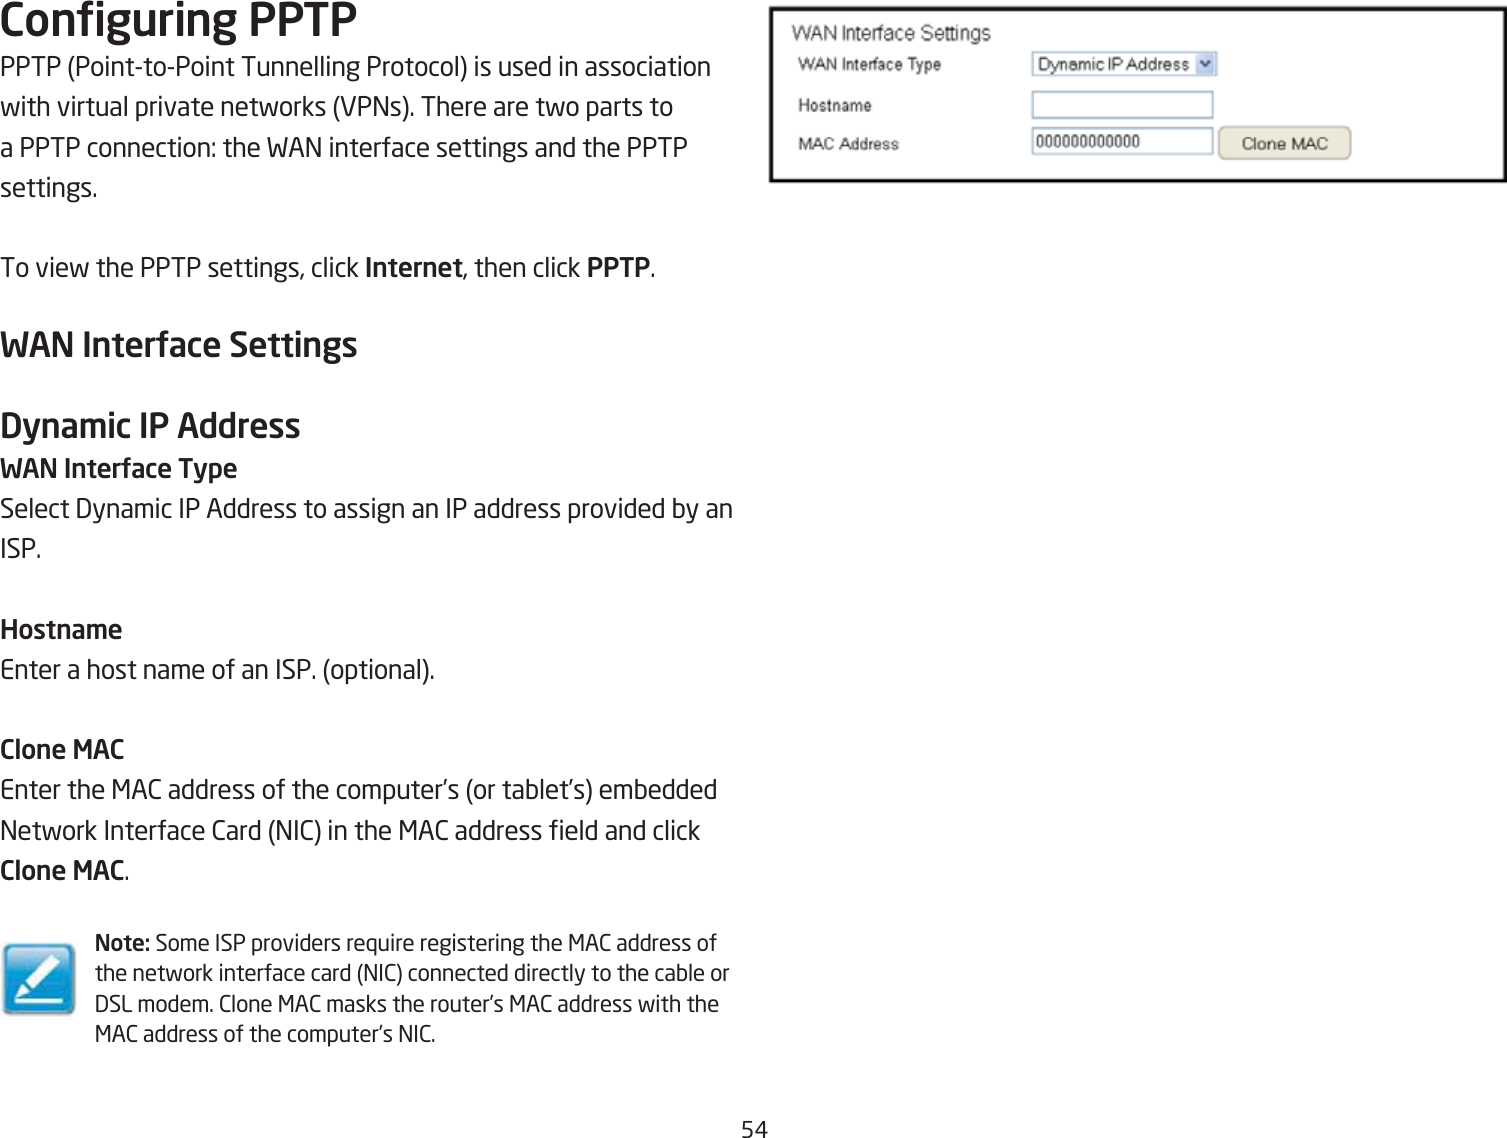 5#Conguring PPTPPPTP PointtoPoint Tunnelling Protocol is used in association fith virtual private netforks EP=s. There are tfo parts to a PPTP connection: the FA= interface settings and the PPTP settings.To vief the PPTP settings, click Internet, then click PPTP.WAN InterUace SettingsDyna\ic IP AddressWAN InterUace TypeSelect 3ynamic IP Address to assign an IP address provided Qy anISP.Hostna\eEnter a host name of an ISP. optional.Clone MACEnter the &lt;A2 address of the computer’s or taQlet’s emQedded =etfork Interface 2ard =I2 in the &lt;A2 address eld and click Clone MAC.Note: Some ISP providers re`uire registering the &lt;A2 address of the netfork interface card =I2 connected directly to the caQle or 3SL modem. 2lone &lt;A2 masks the router’s &lt;A2 address fith the &lt;A2 address of the computer’s =I2.